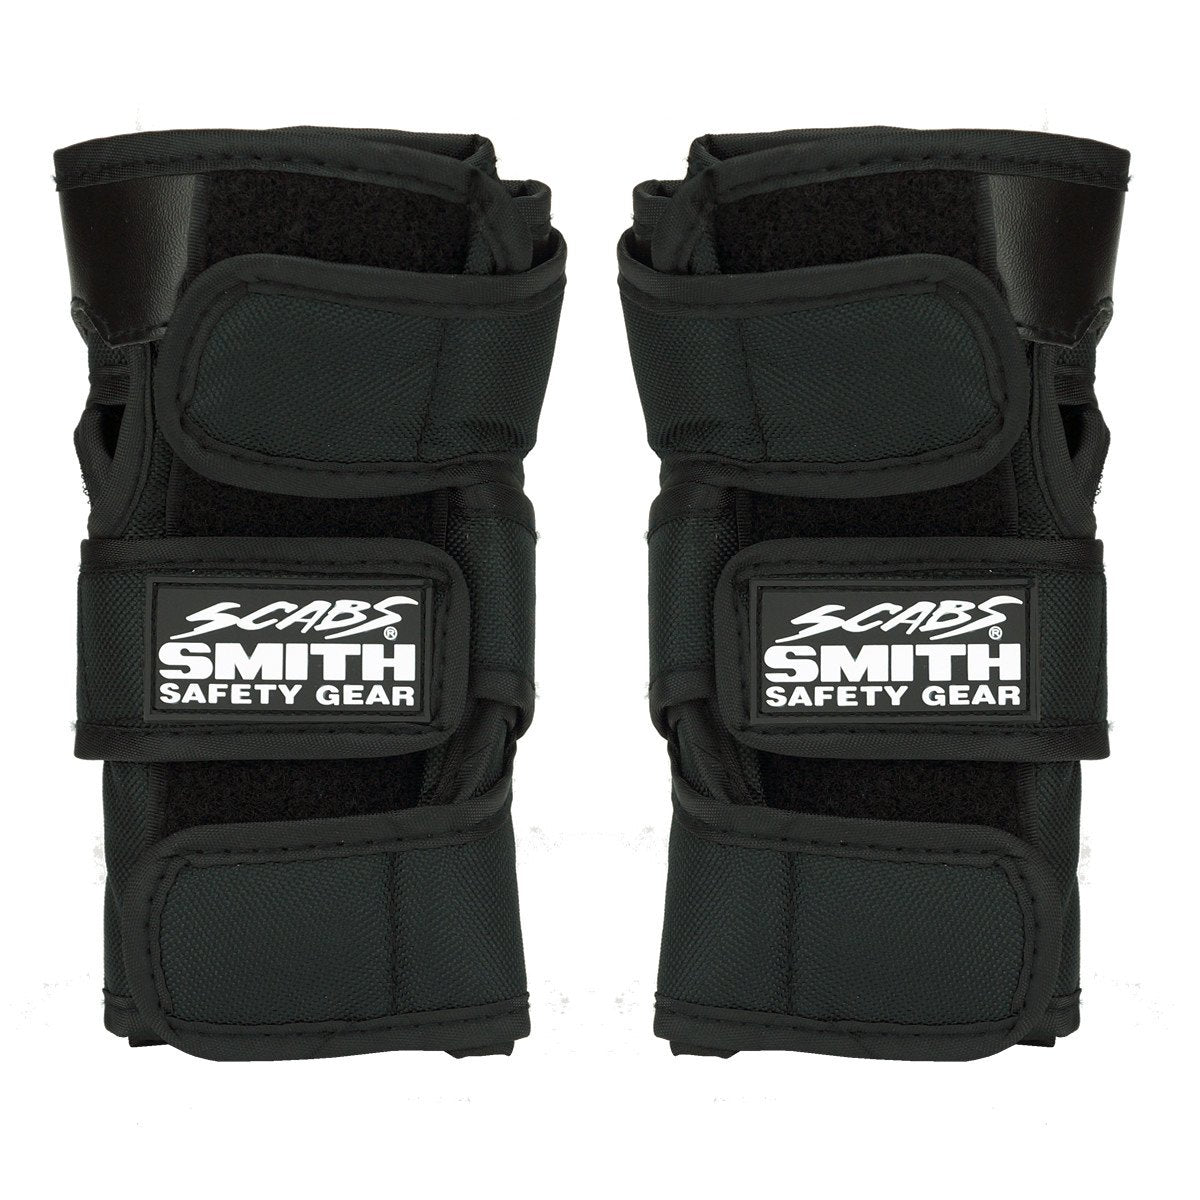 Smith Scabs Wrist Guards Black XLARGE